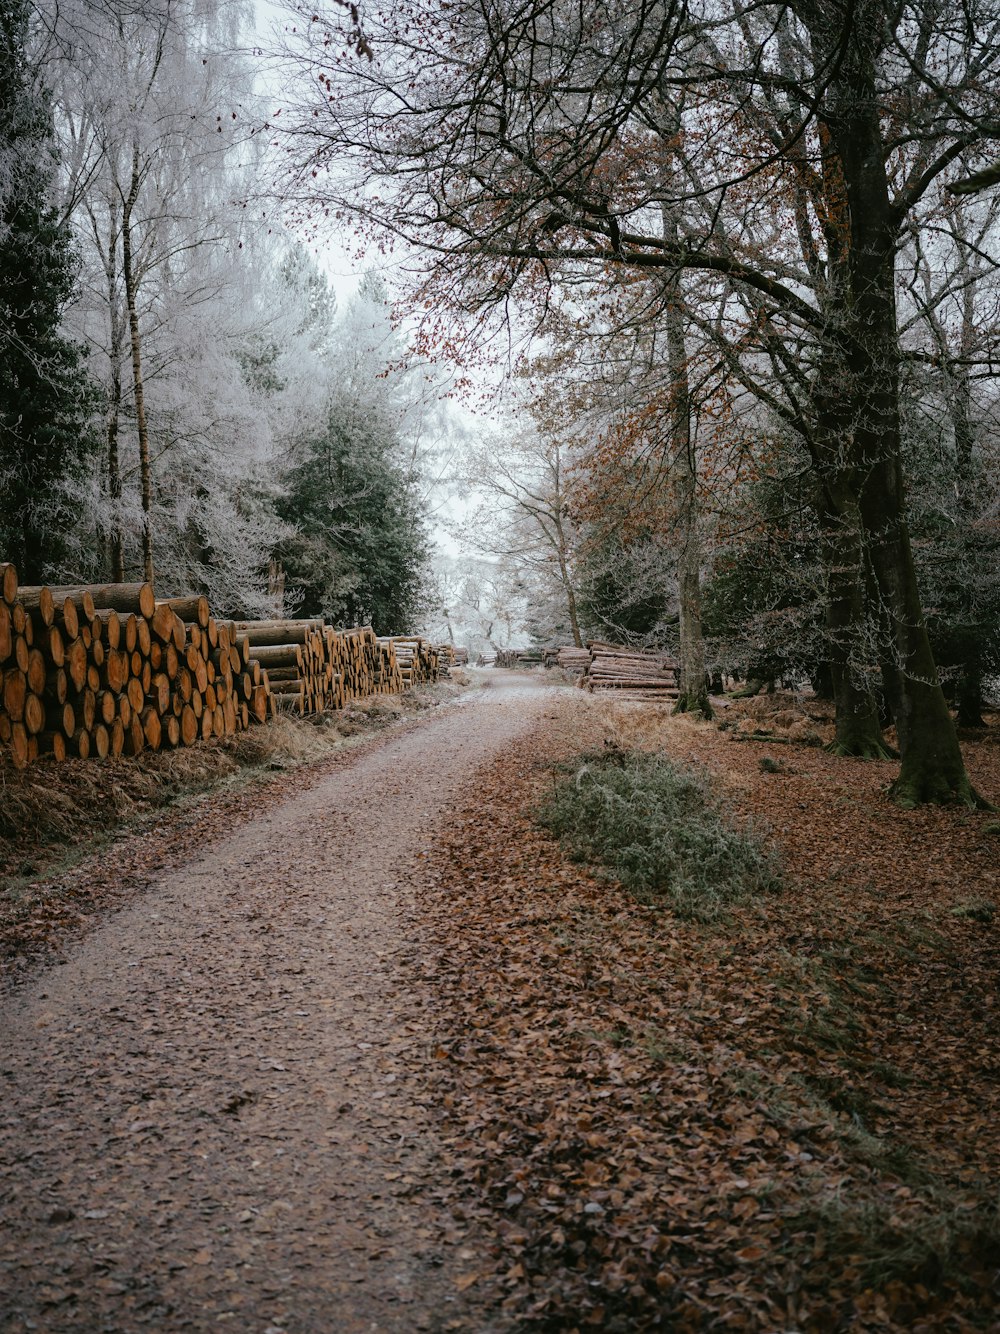 a dirt road surrounded by trees and logs